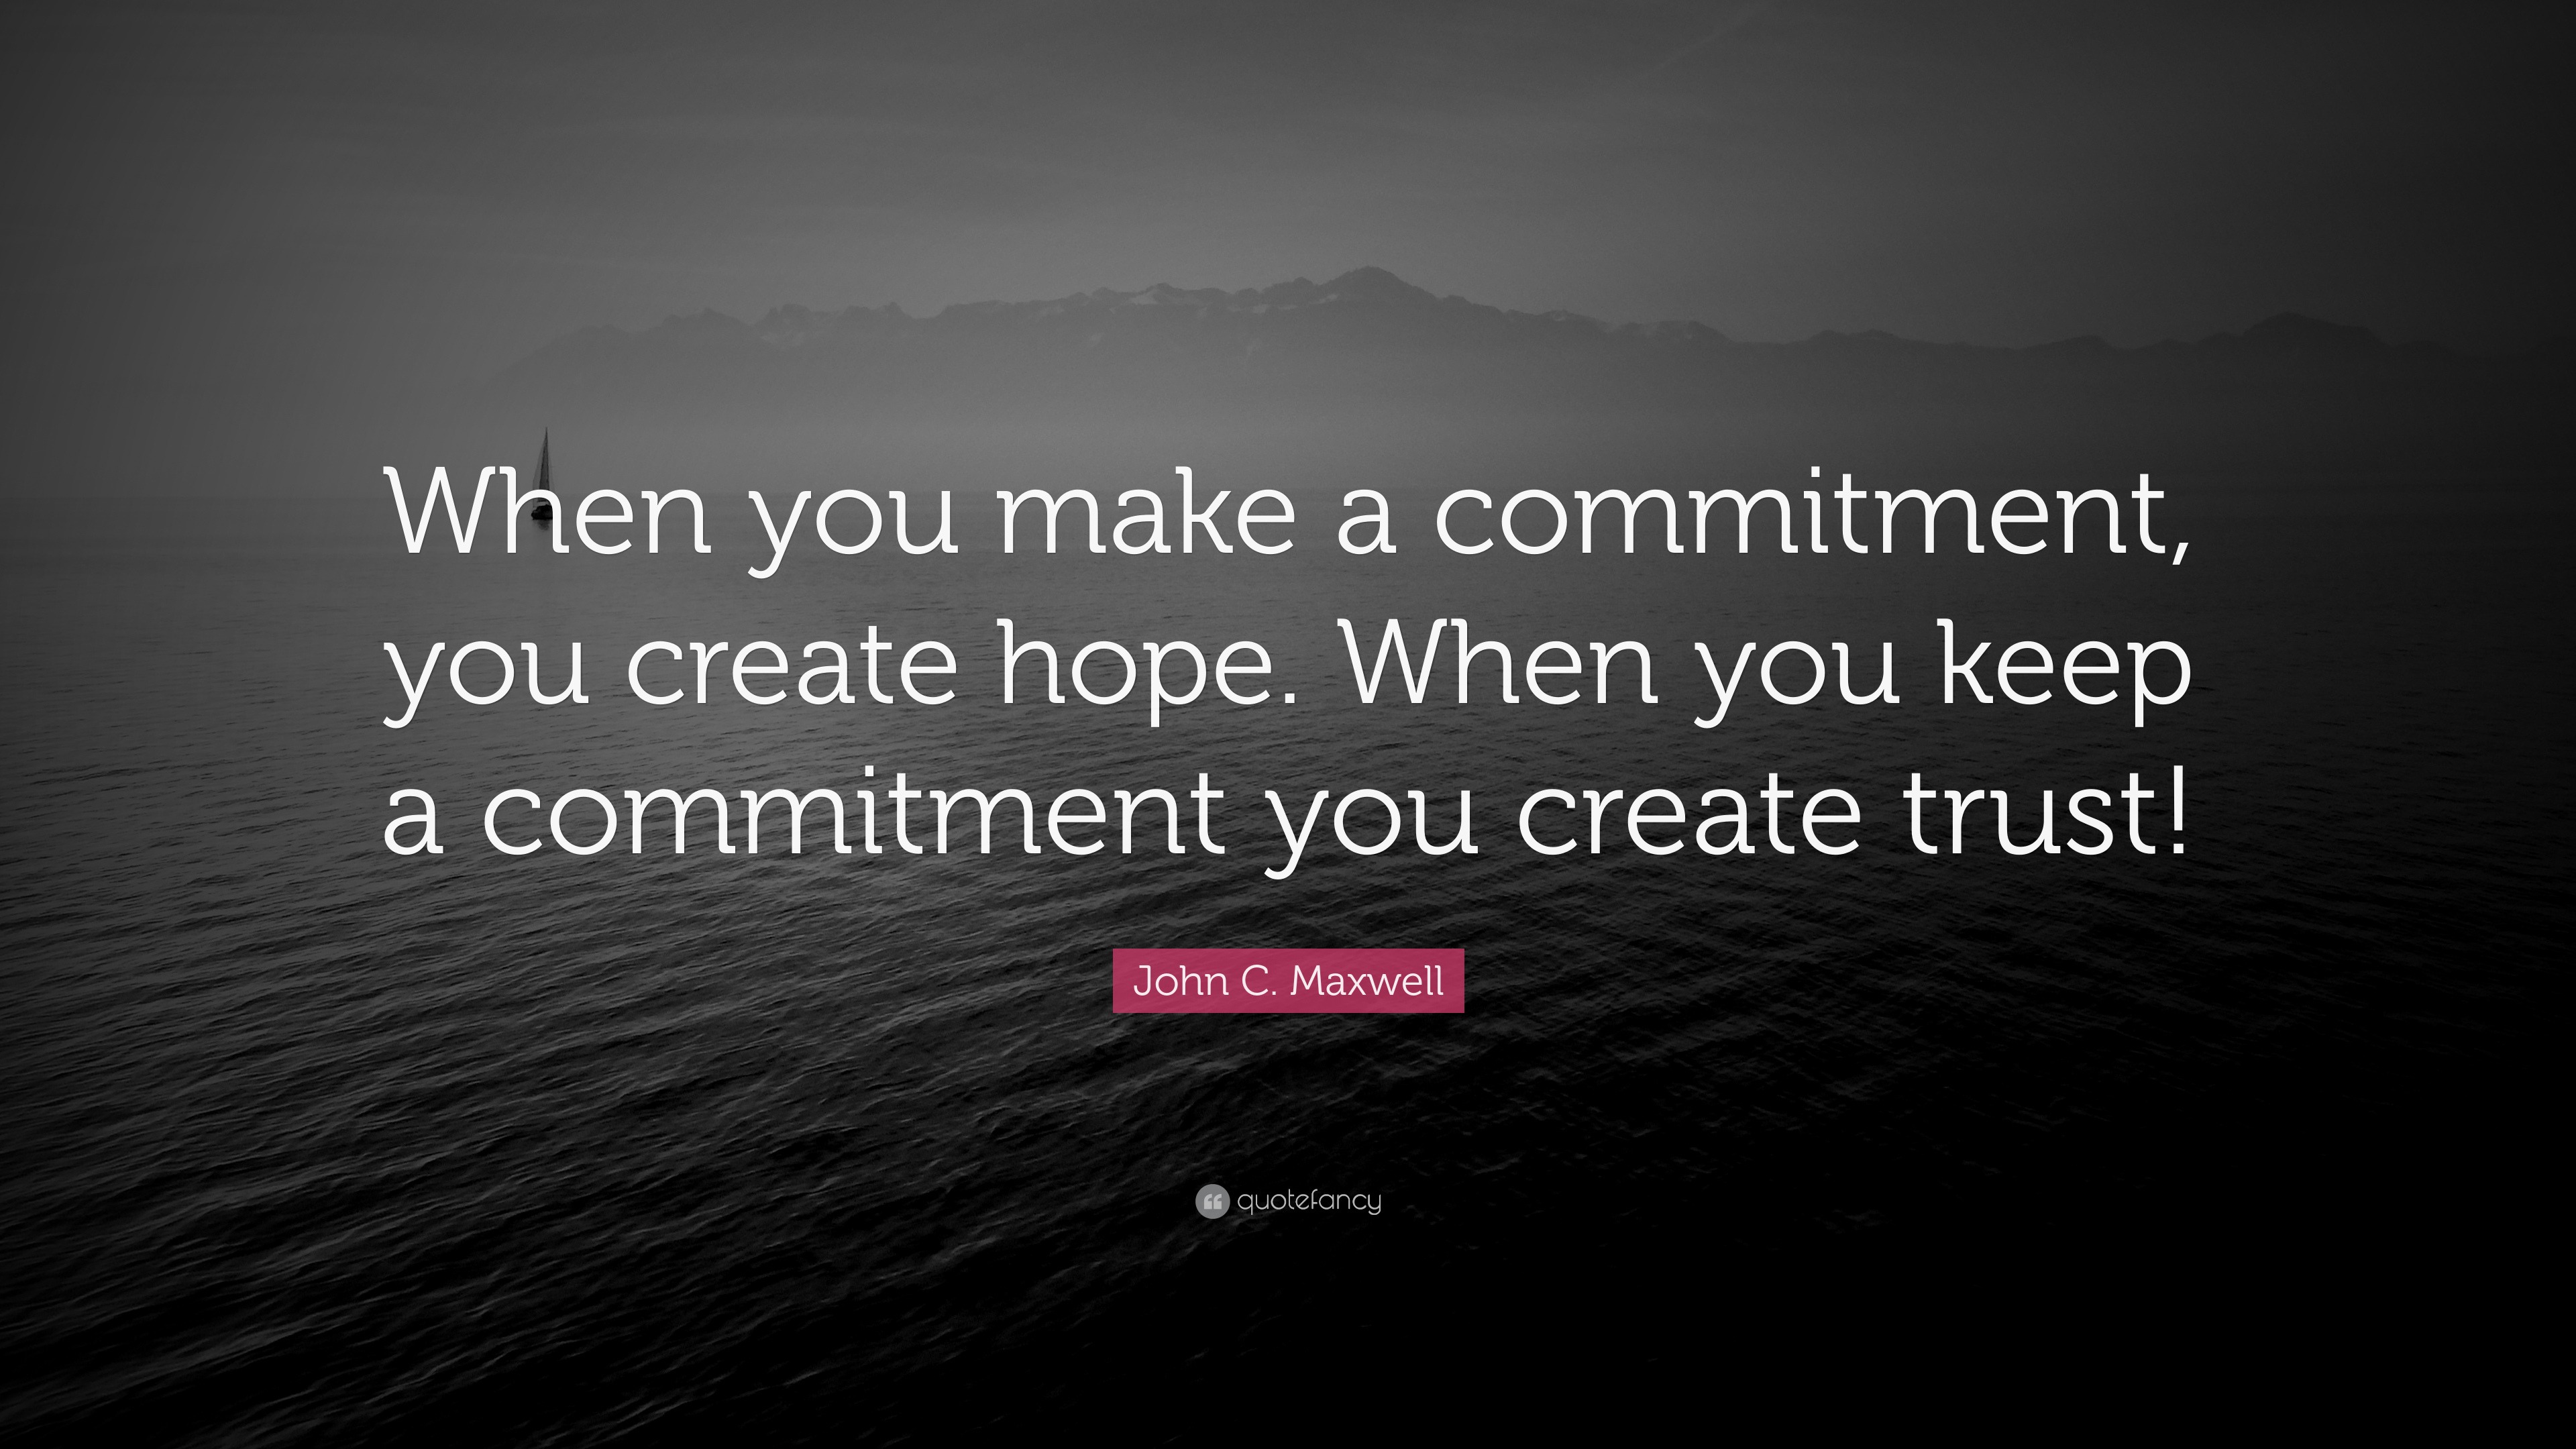 Try before making a commitment